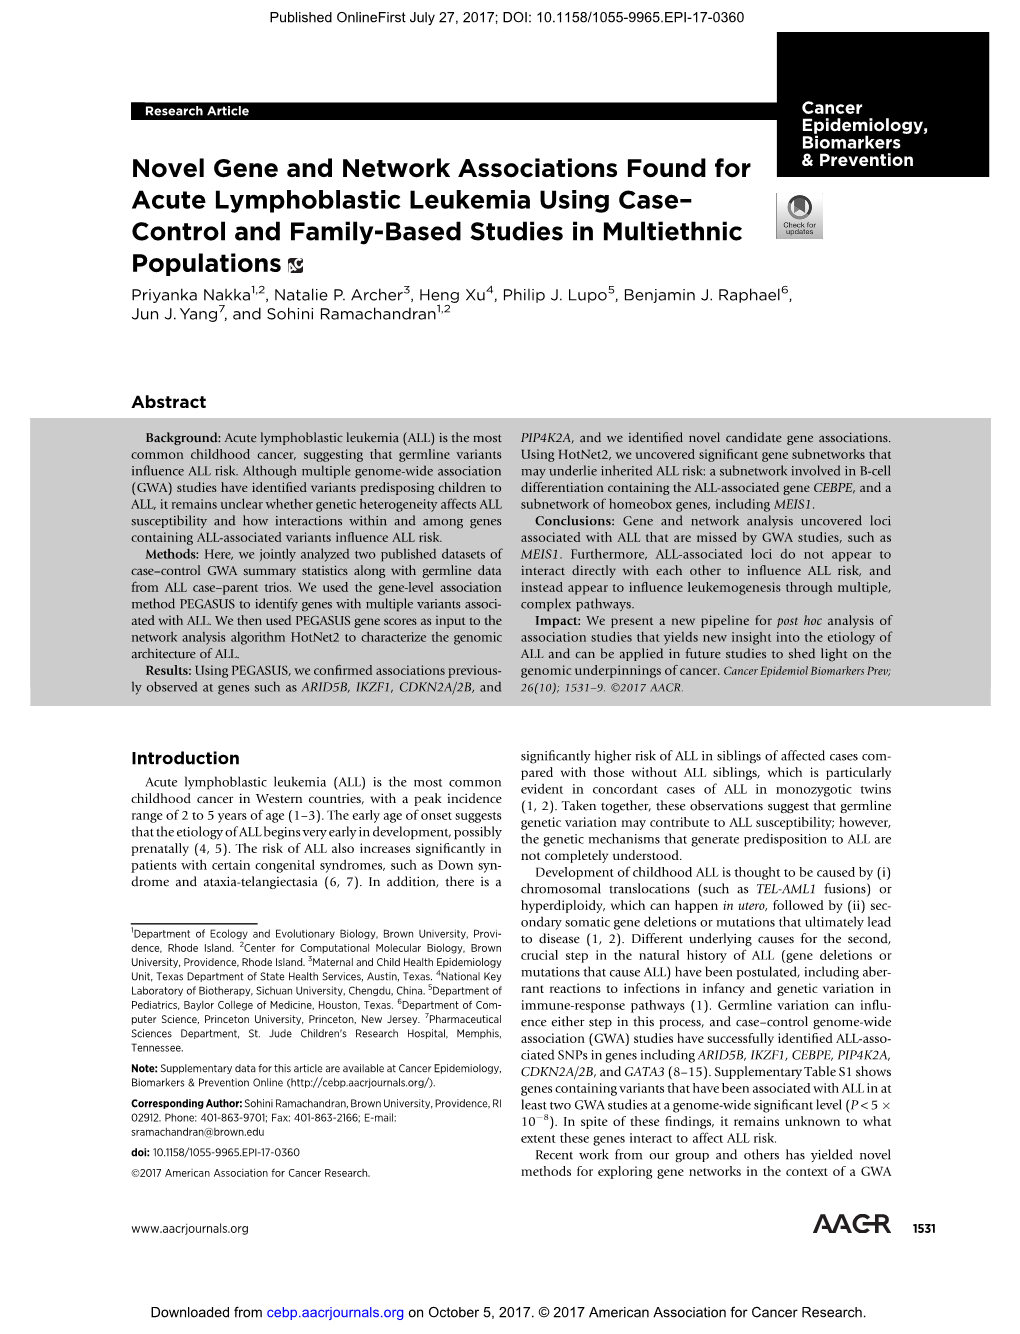 Novel Gene and Network Associations Found for Acute Lymphoblastic Leukemia Using Case−Control and Family-Based Studies in Multiethnic Populations